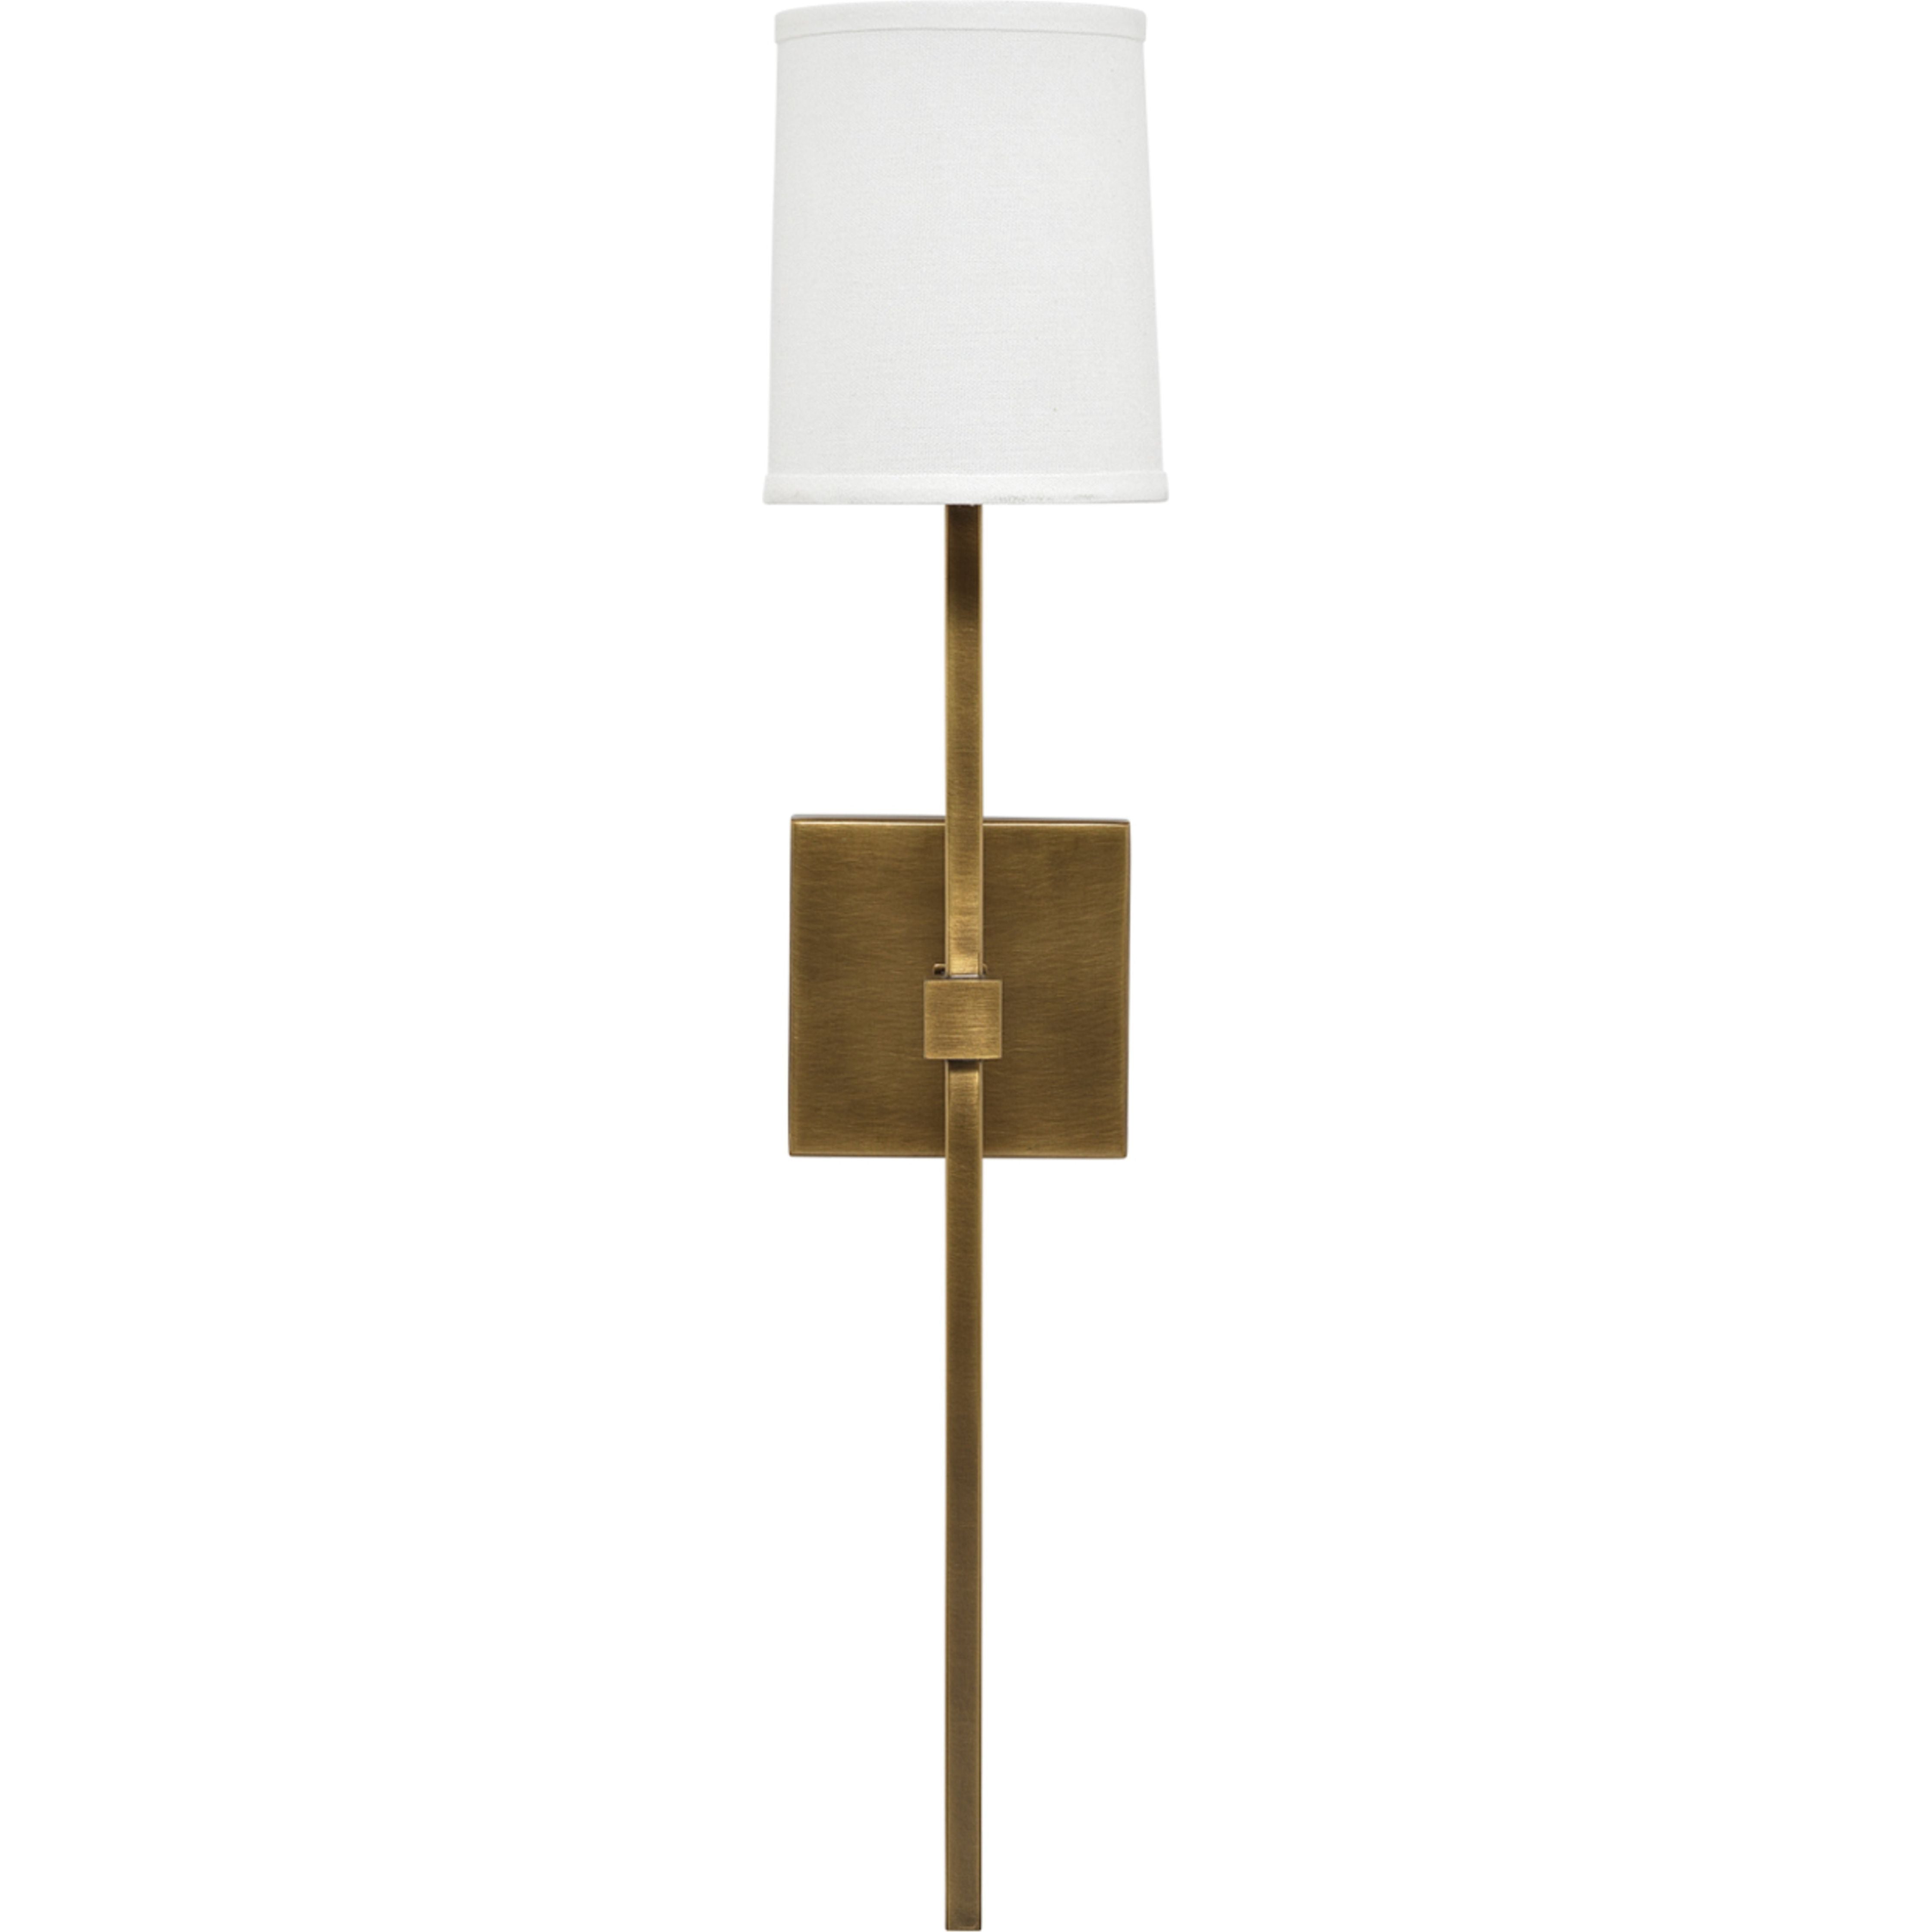 Jamie Young Company - 4MINE-SCAB - Minerva Wall Sconce -  - Antique Brass, White 